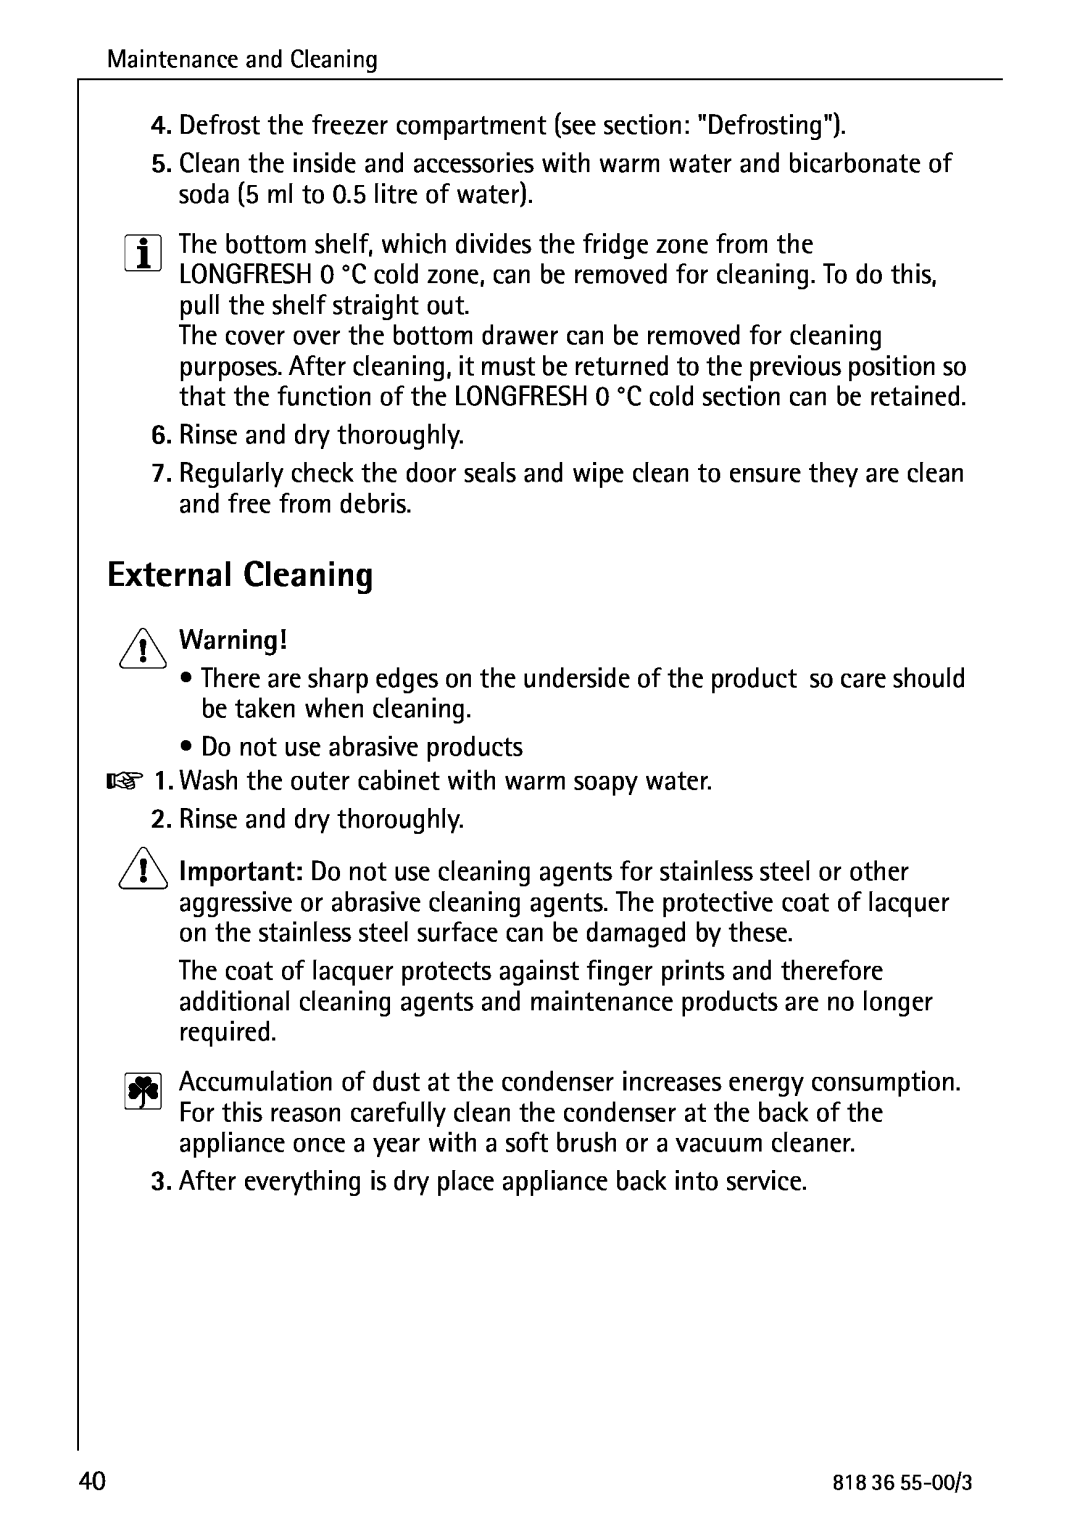 AEG 86378-KG operating instructions External Cleaning 